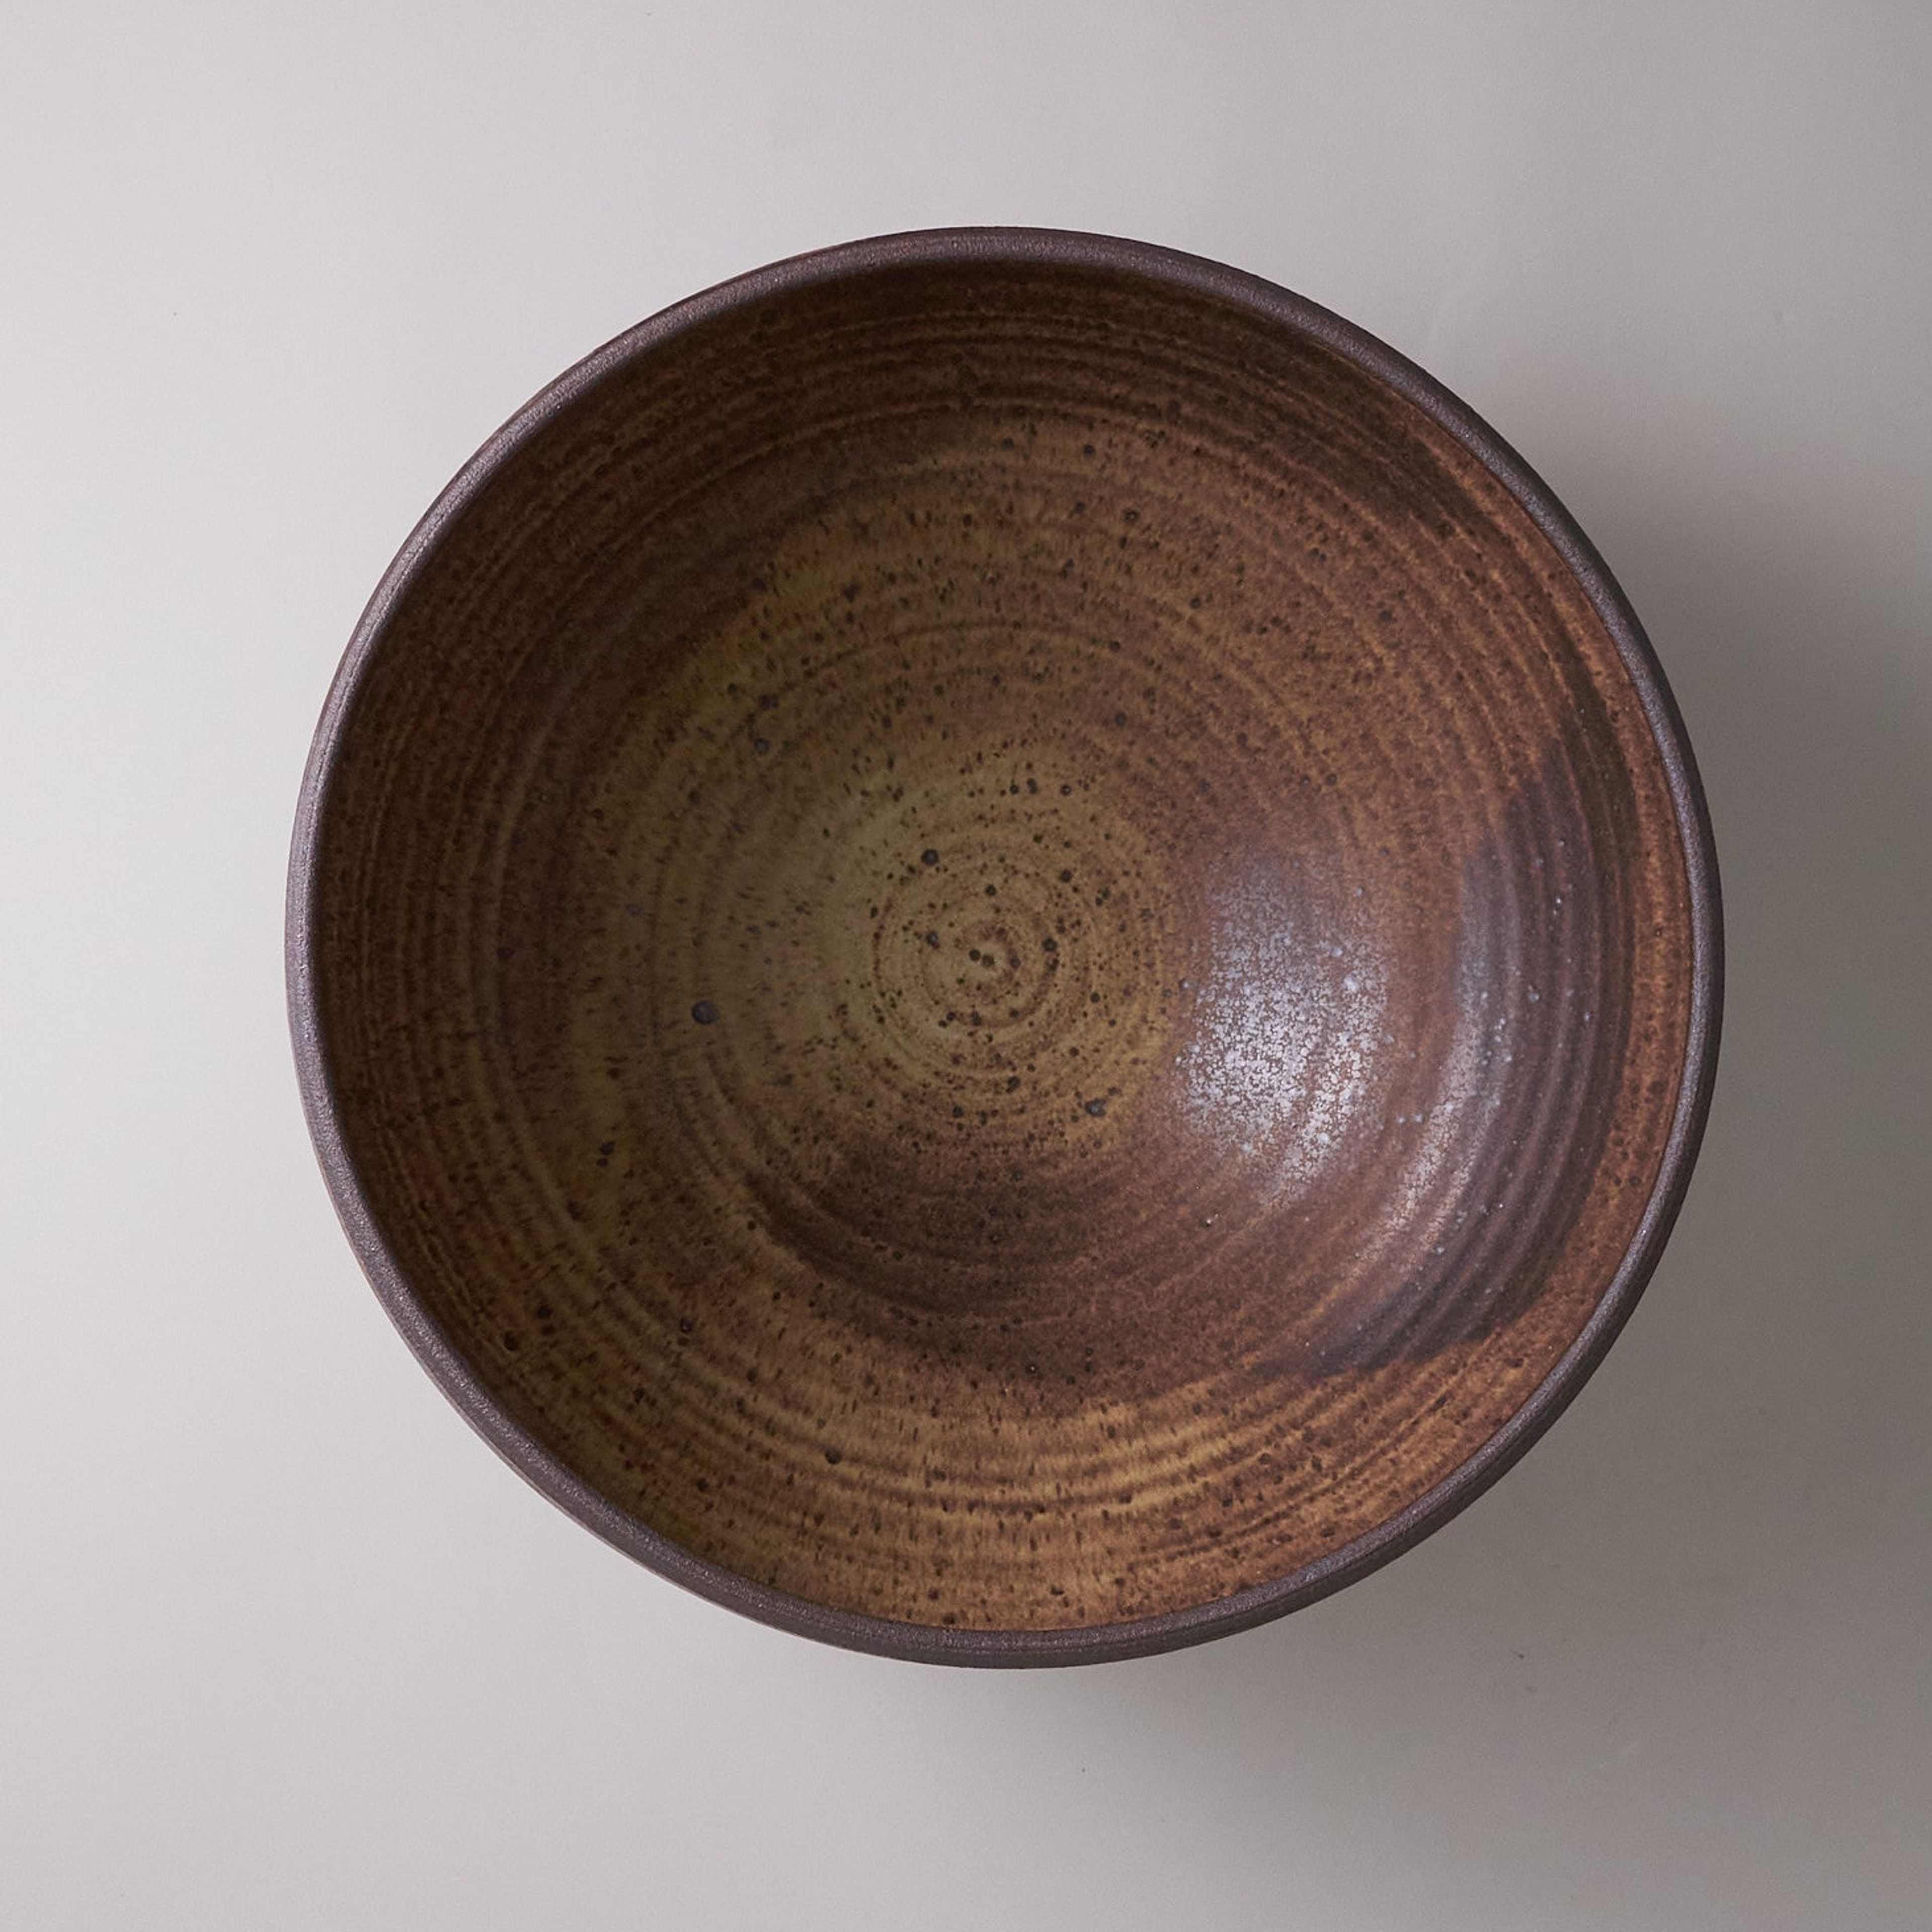 Large Footed Bowl in Live Oak